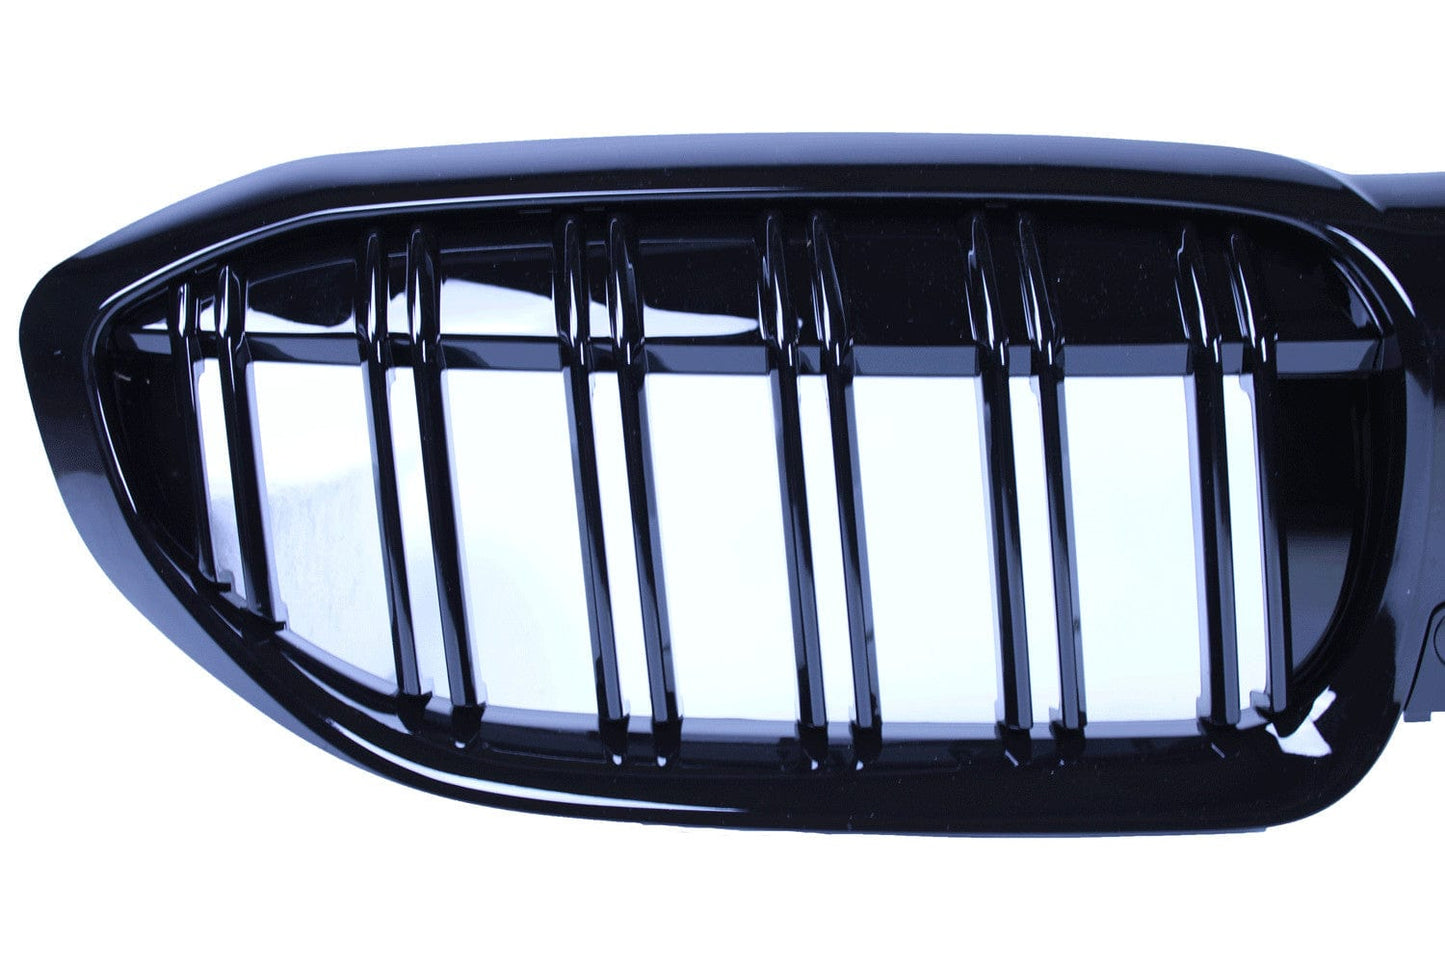 GRILL KIDNEYS COMPATIBLE WITH BMW 3 SERIES G20 - G21 GLOSS BLACK